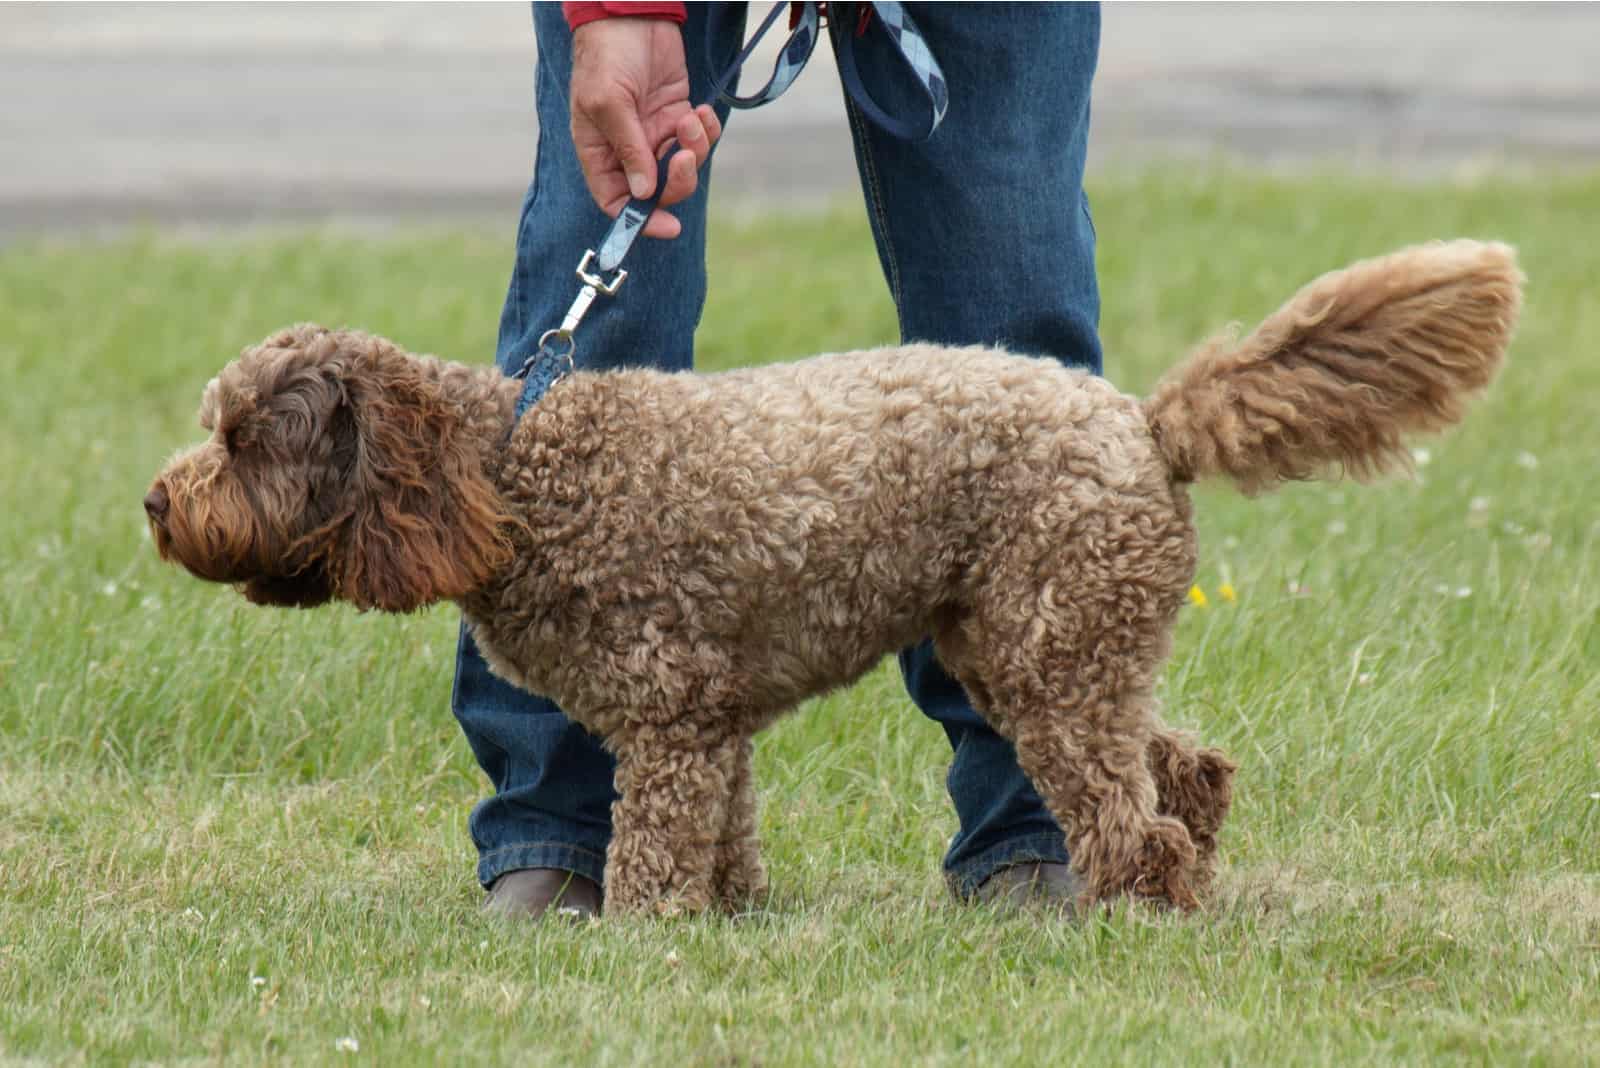 Cockapoo crossbreed dog being taken for a walk